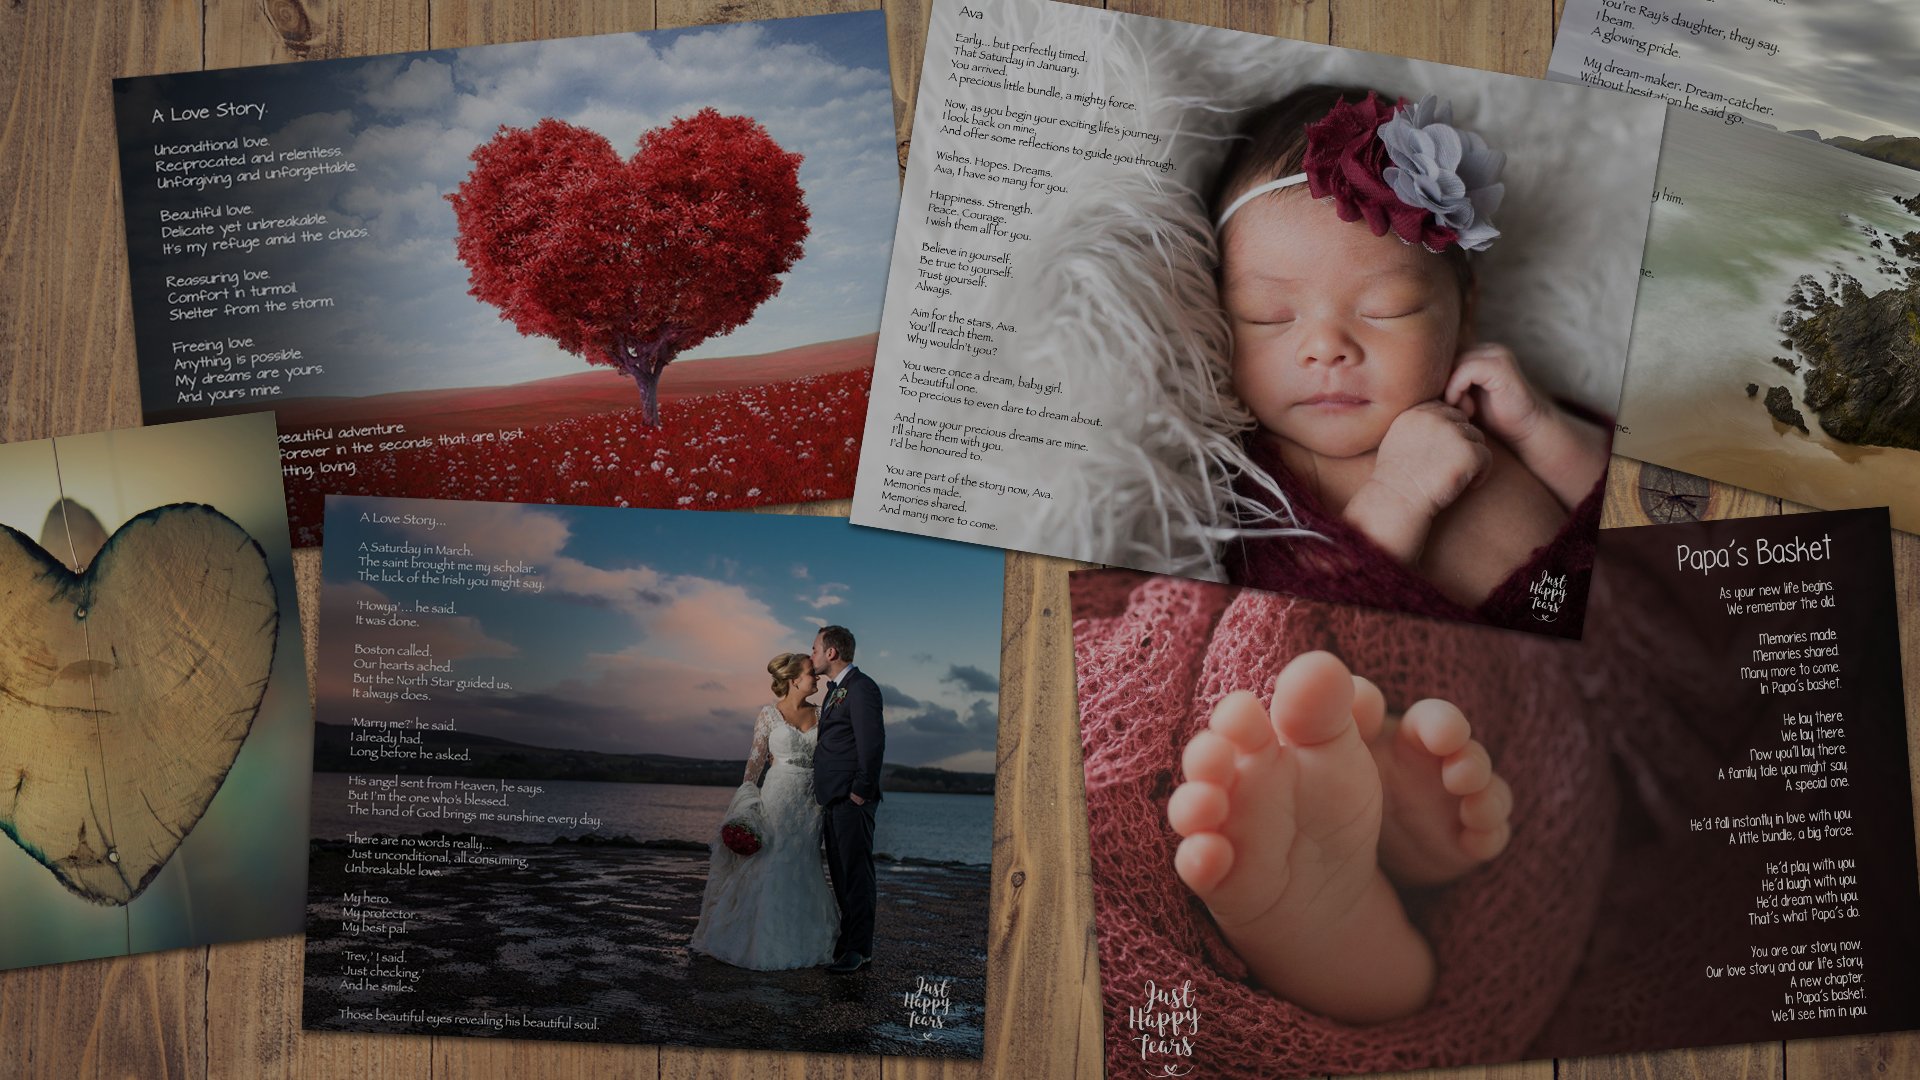 Convey Your Love Through Surprise Poems And Other Personalized Items